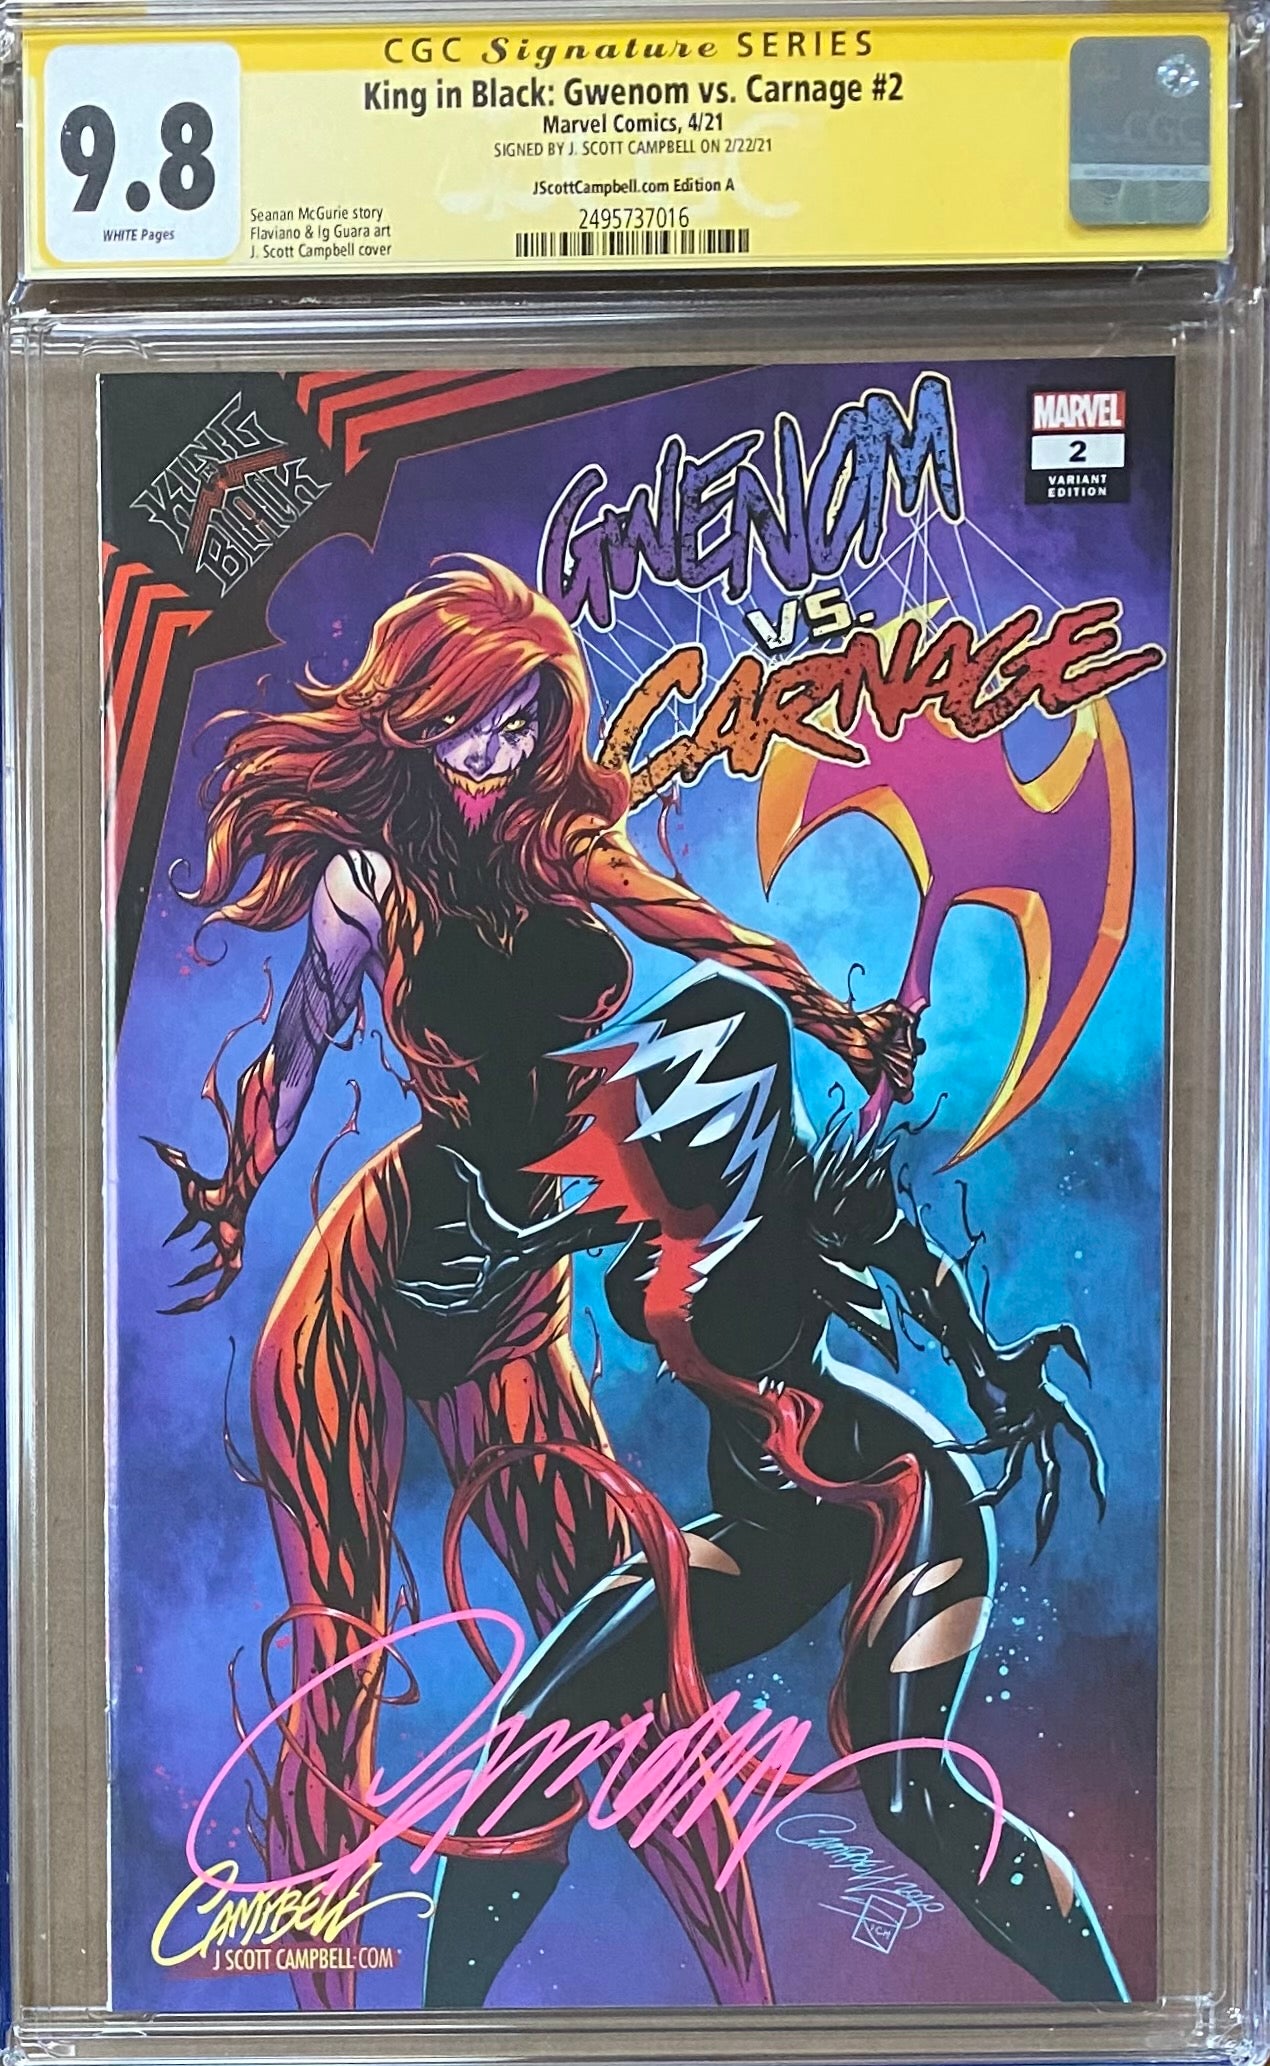 King in Black: Gwenom vs. Carnage #2 J. Scott Campbell Exclusive A CGC 9.8 SS